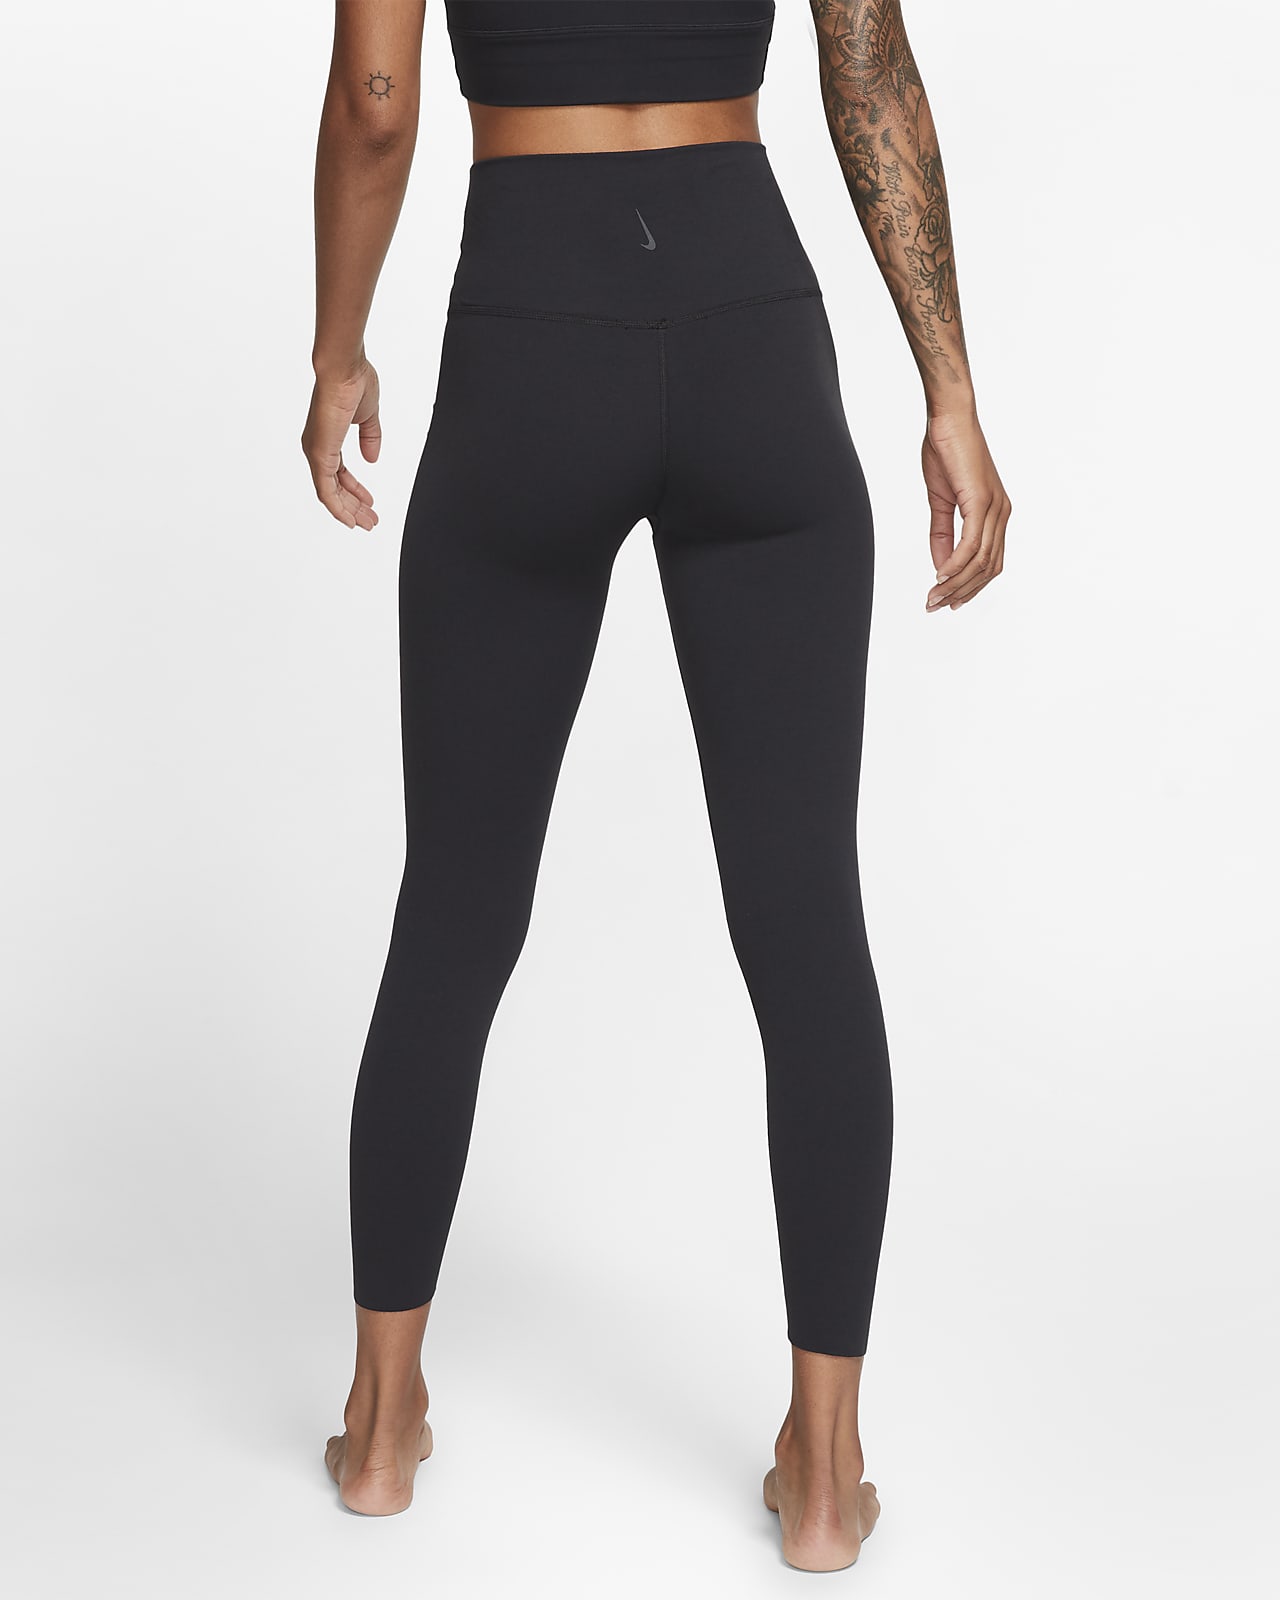 Nike Womens Fitness Workout Athletic Leggings